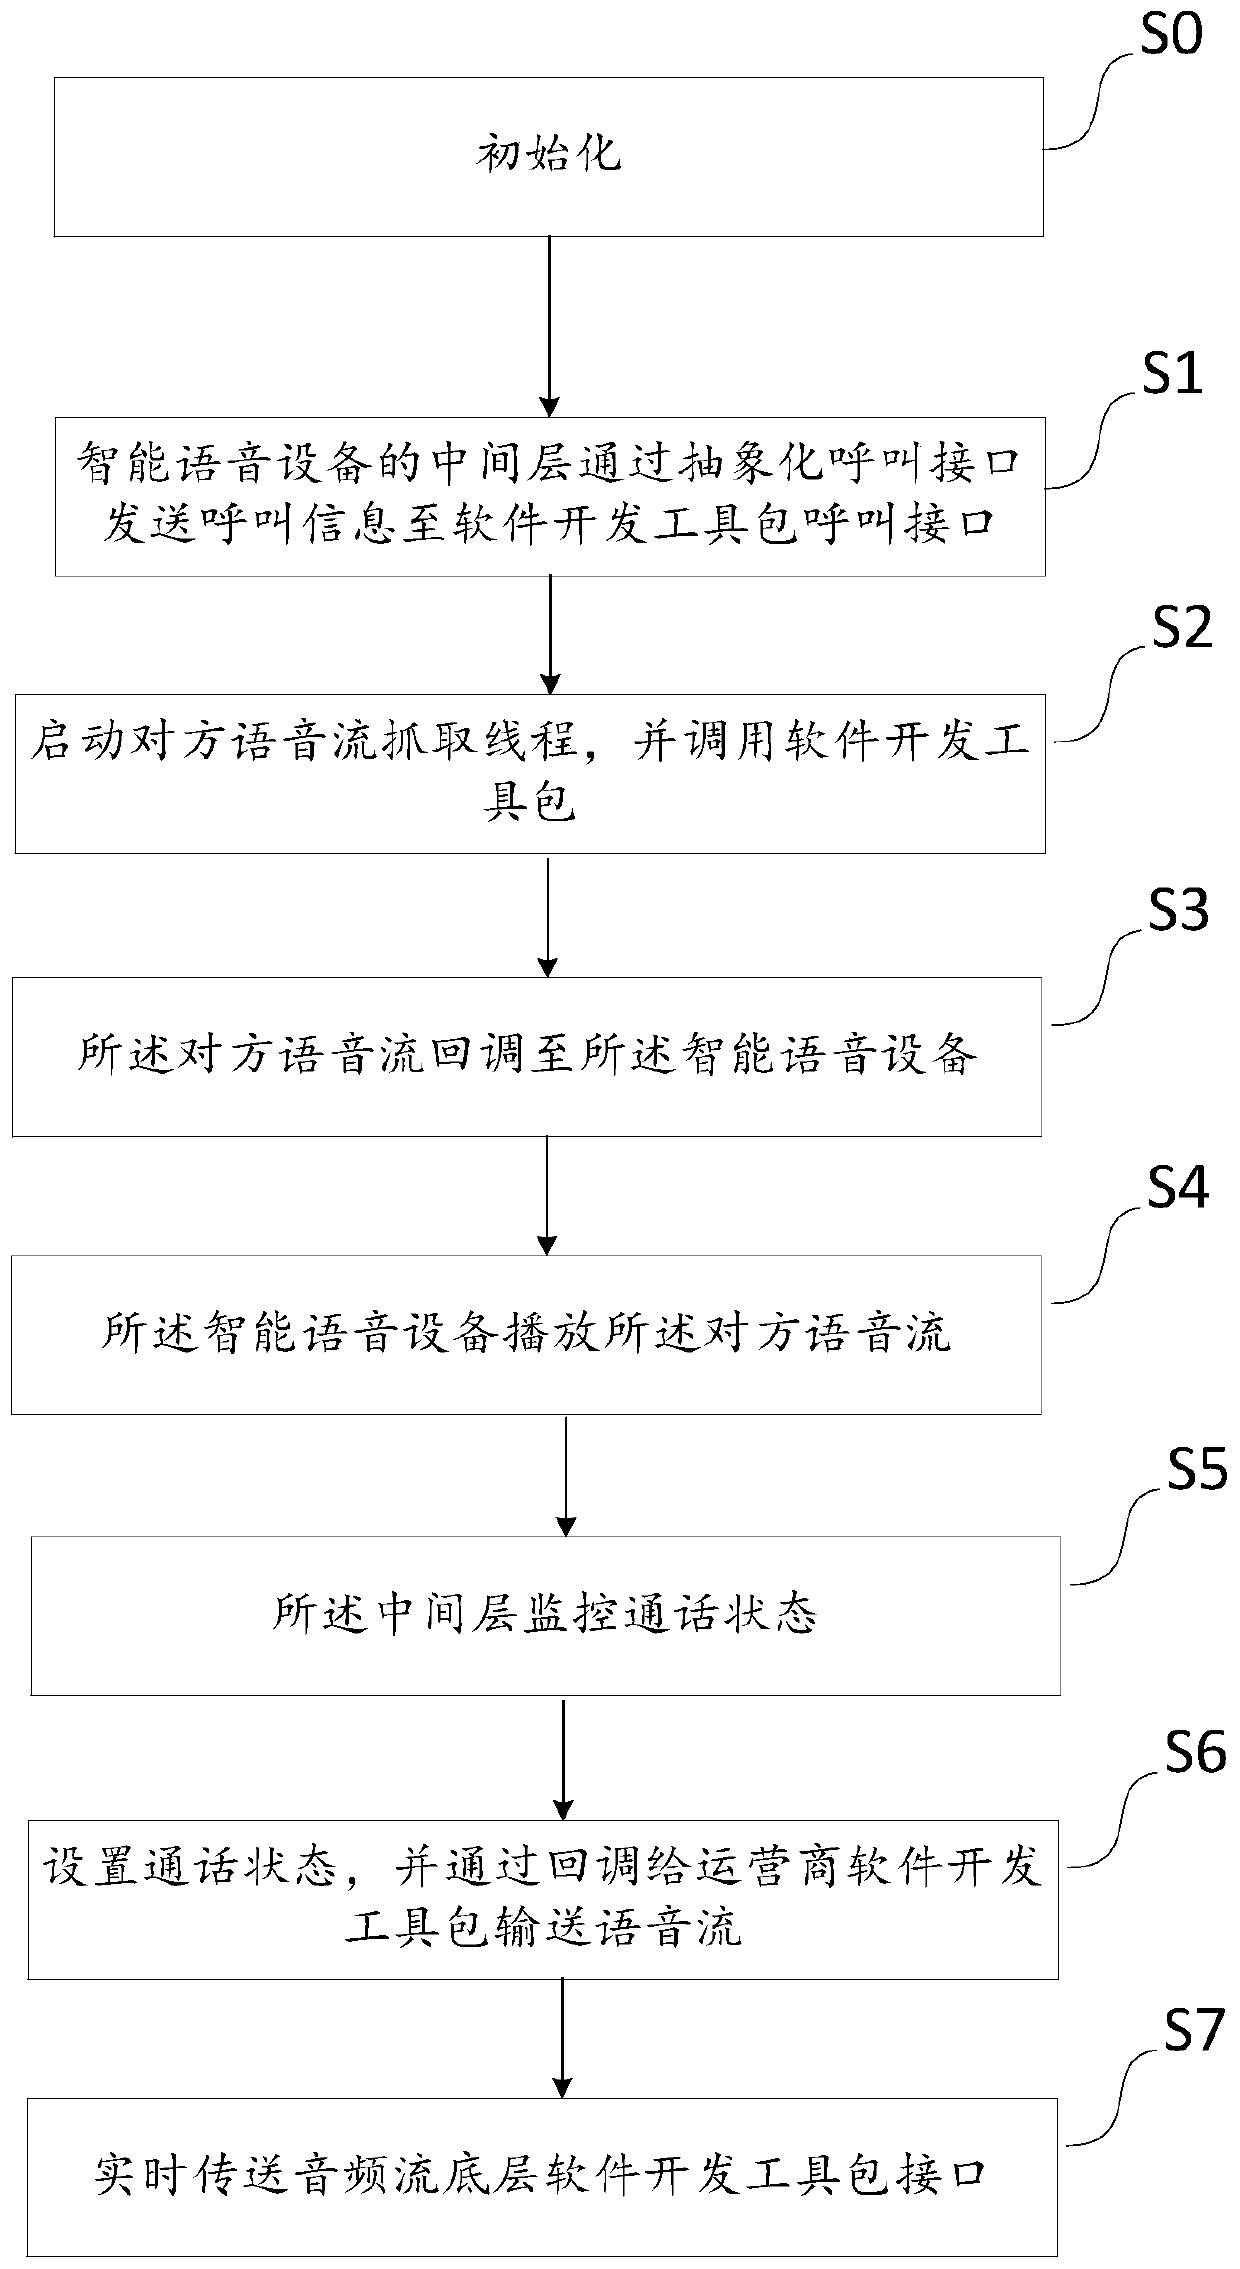 Method and system for making call based on intelligent voice equipment